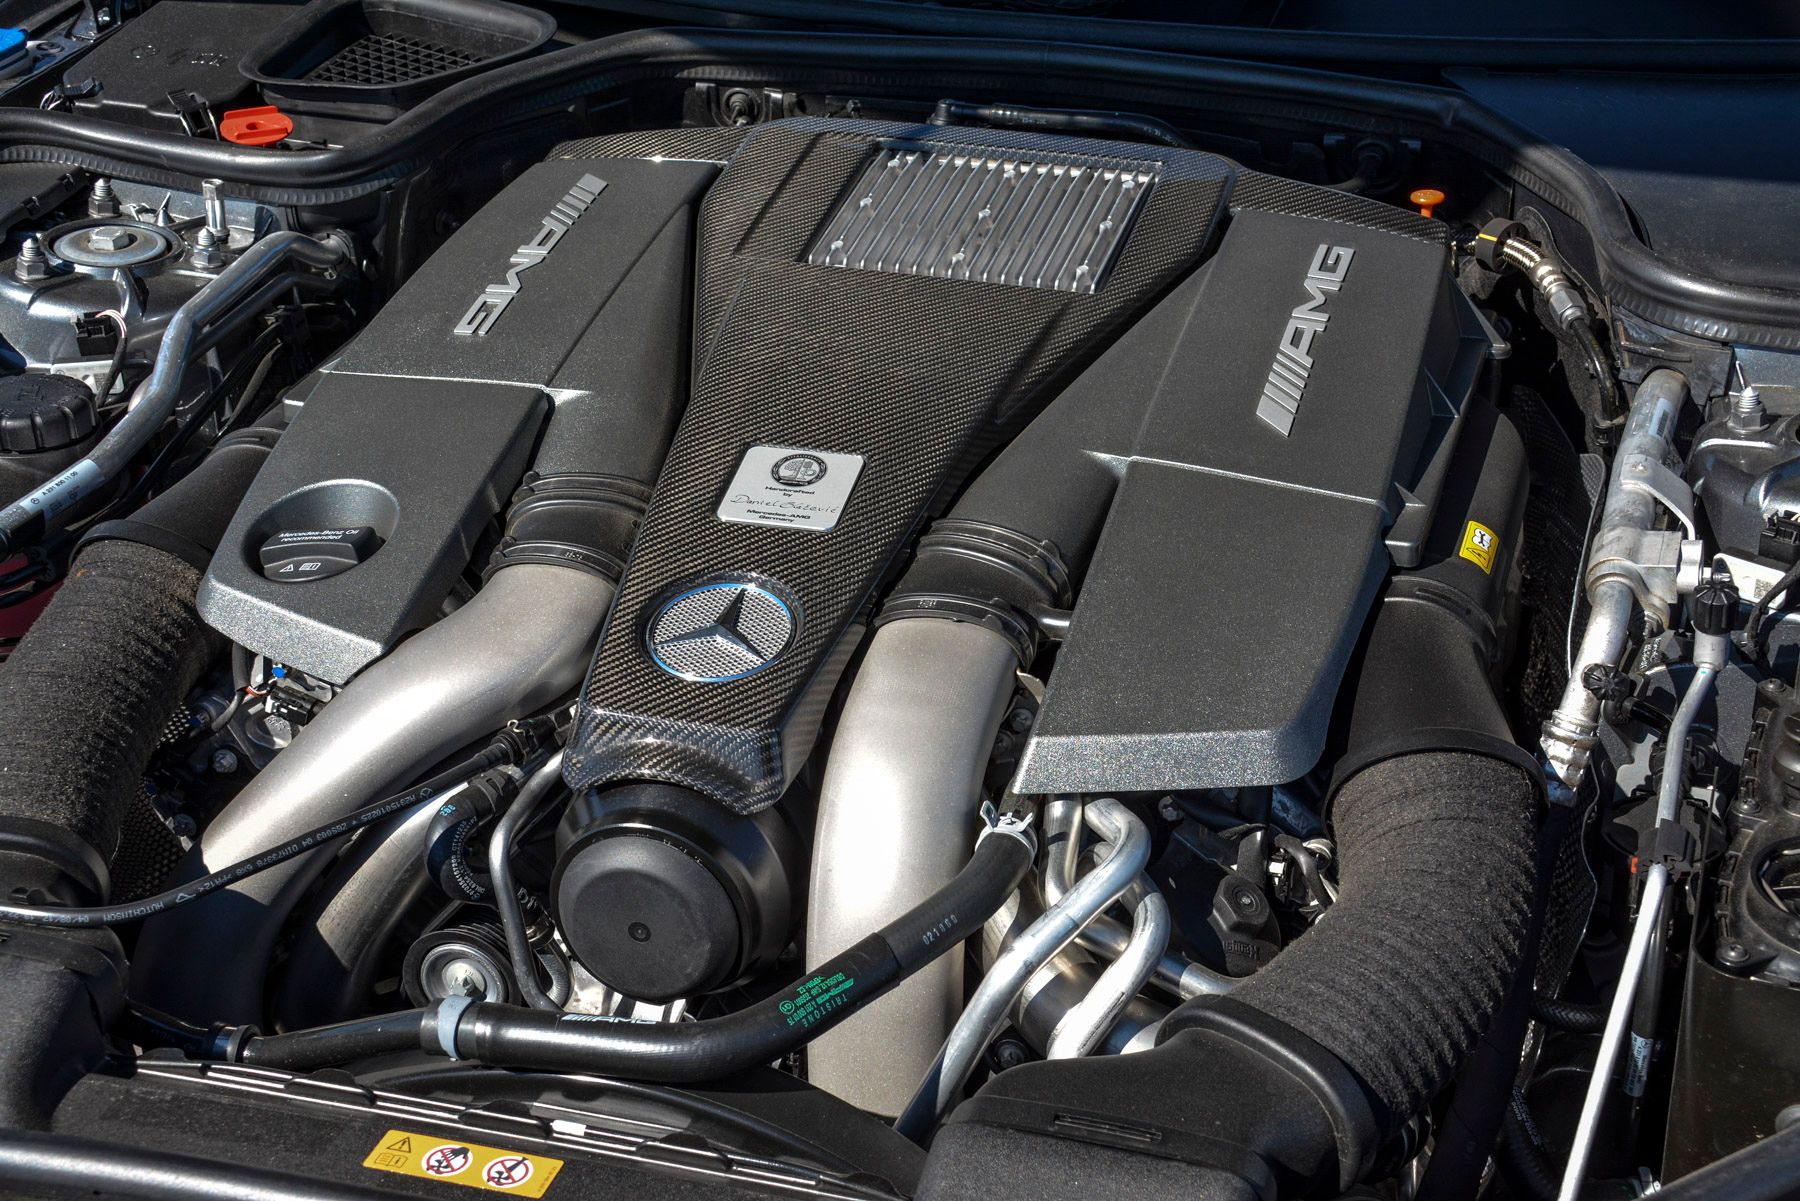 An Image Of Mercedes-AMG SL's Engine